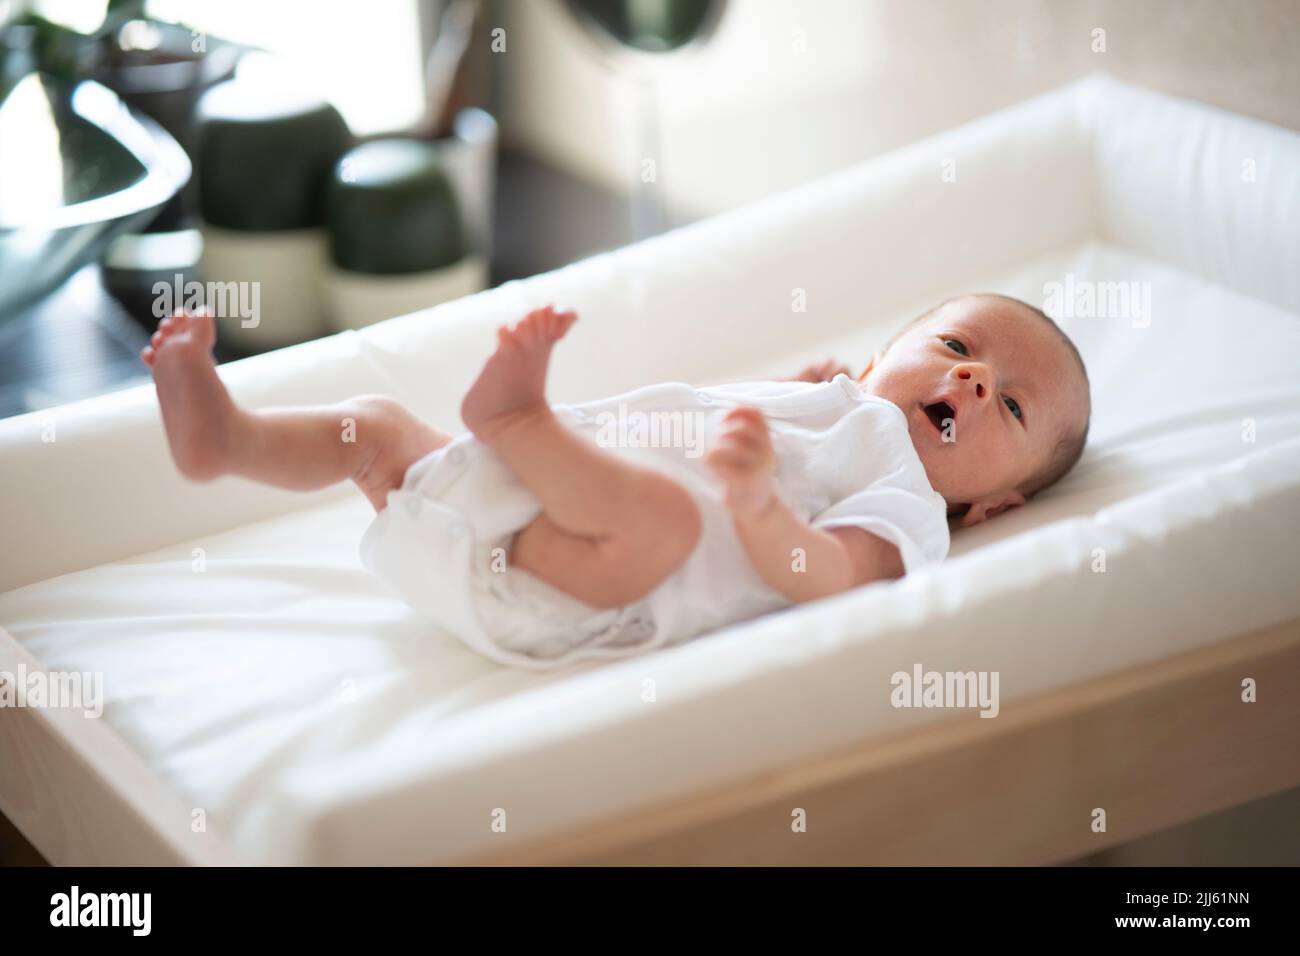 Agitated baby waving arms and legs while lying on diaper changer Stock Photo